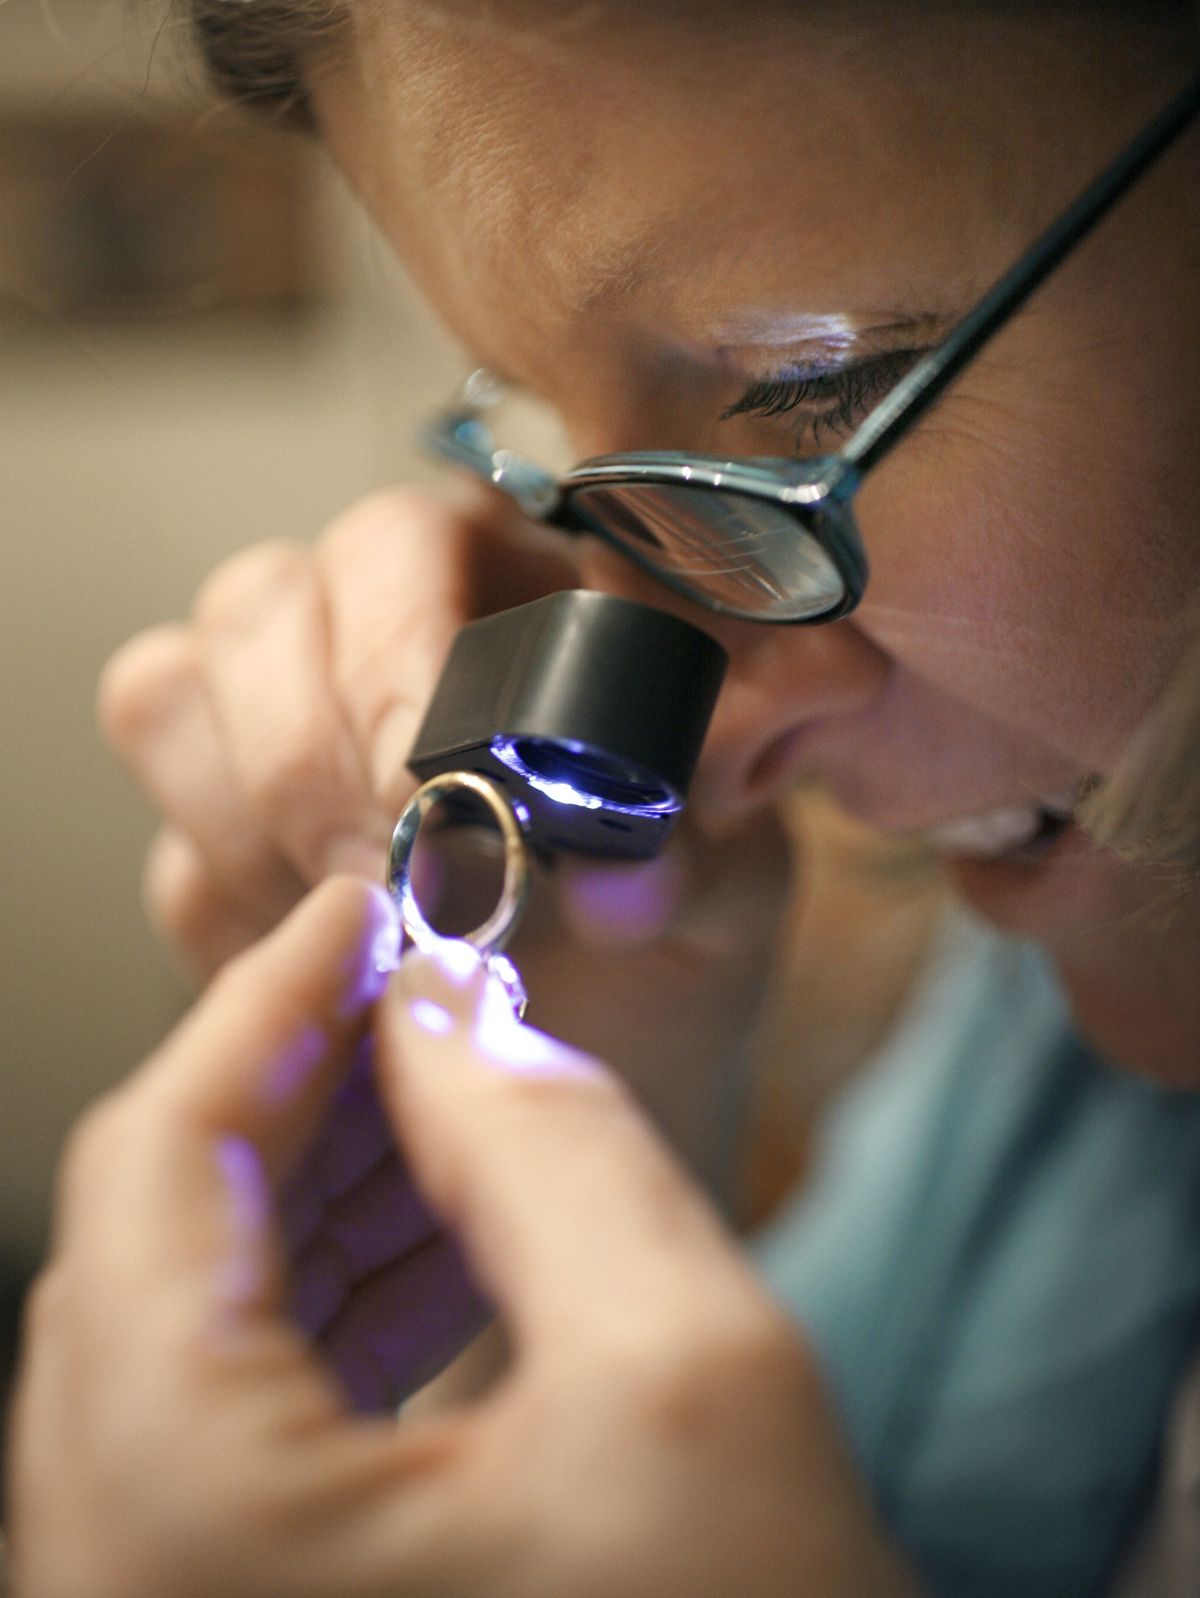 Gold tester Maggie Percival, of Granby, Conn., looks at a gold ring through a jewelers loupe during a gold party at a private home. Like the Tupperware parties from years ago, gold parties tap into a host’s social connections to drive up attendance, while the presence of friends helps reassure partygoers that selling gold isn’t taboo. (Associated Press / The Spokesman-Review)